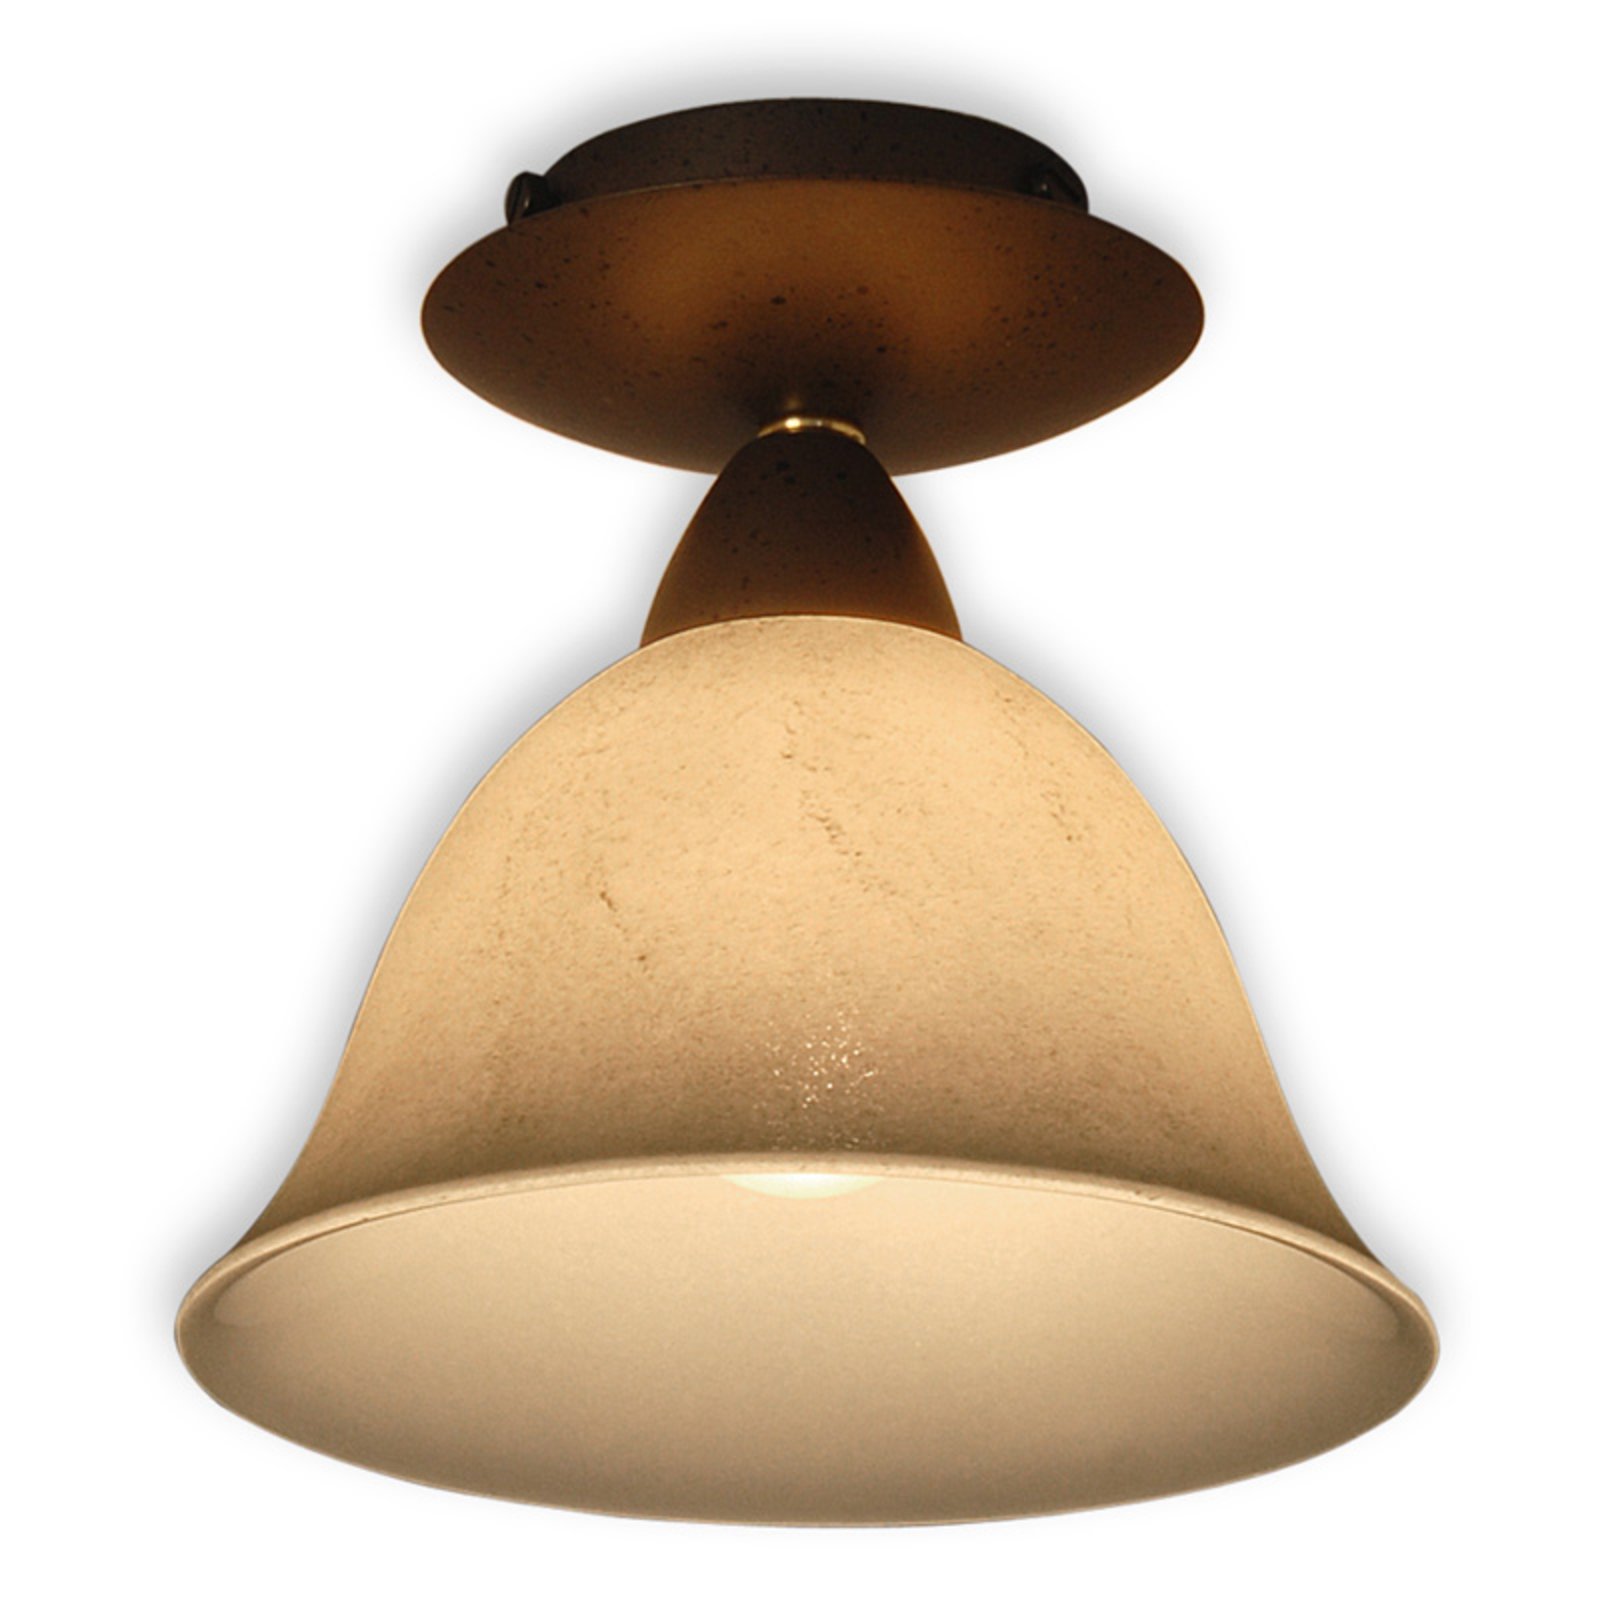 Pusta - ceiling light with scavo smoked glass